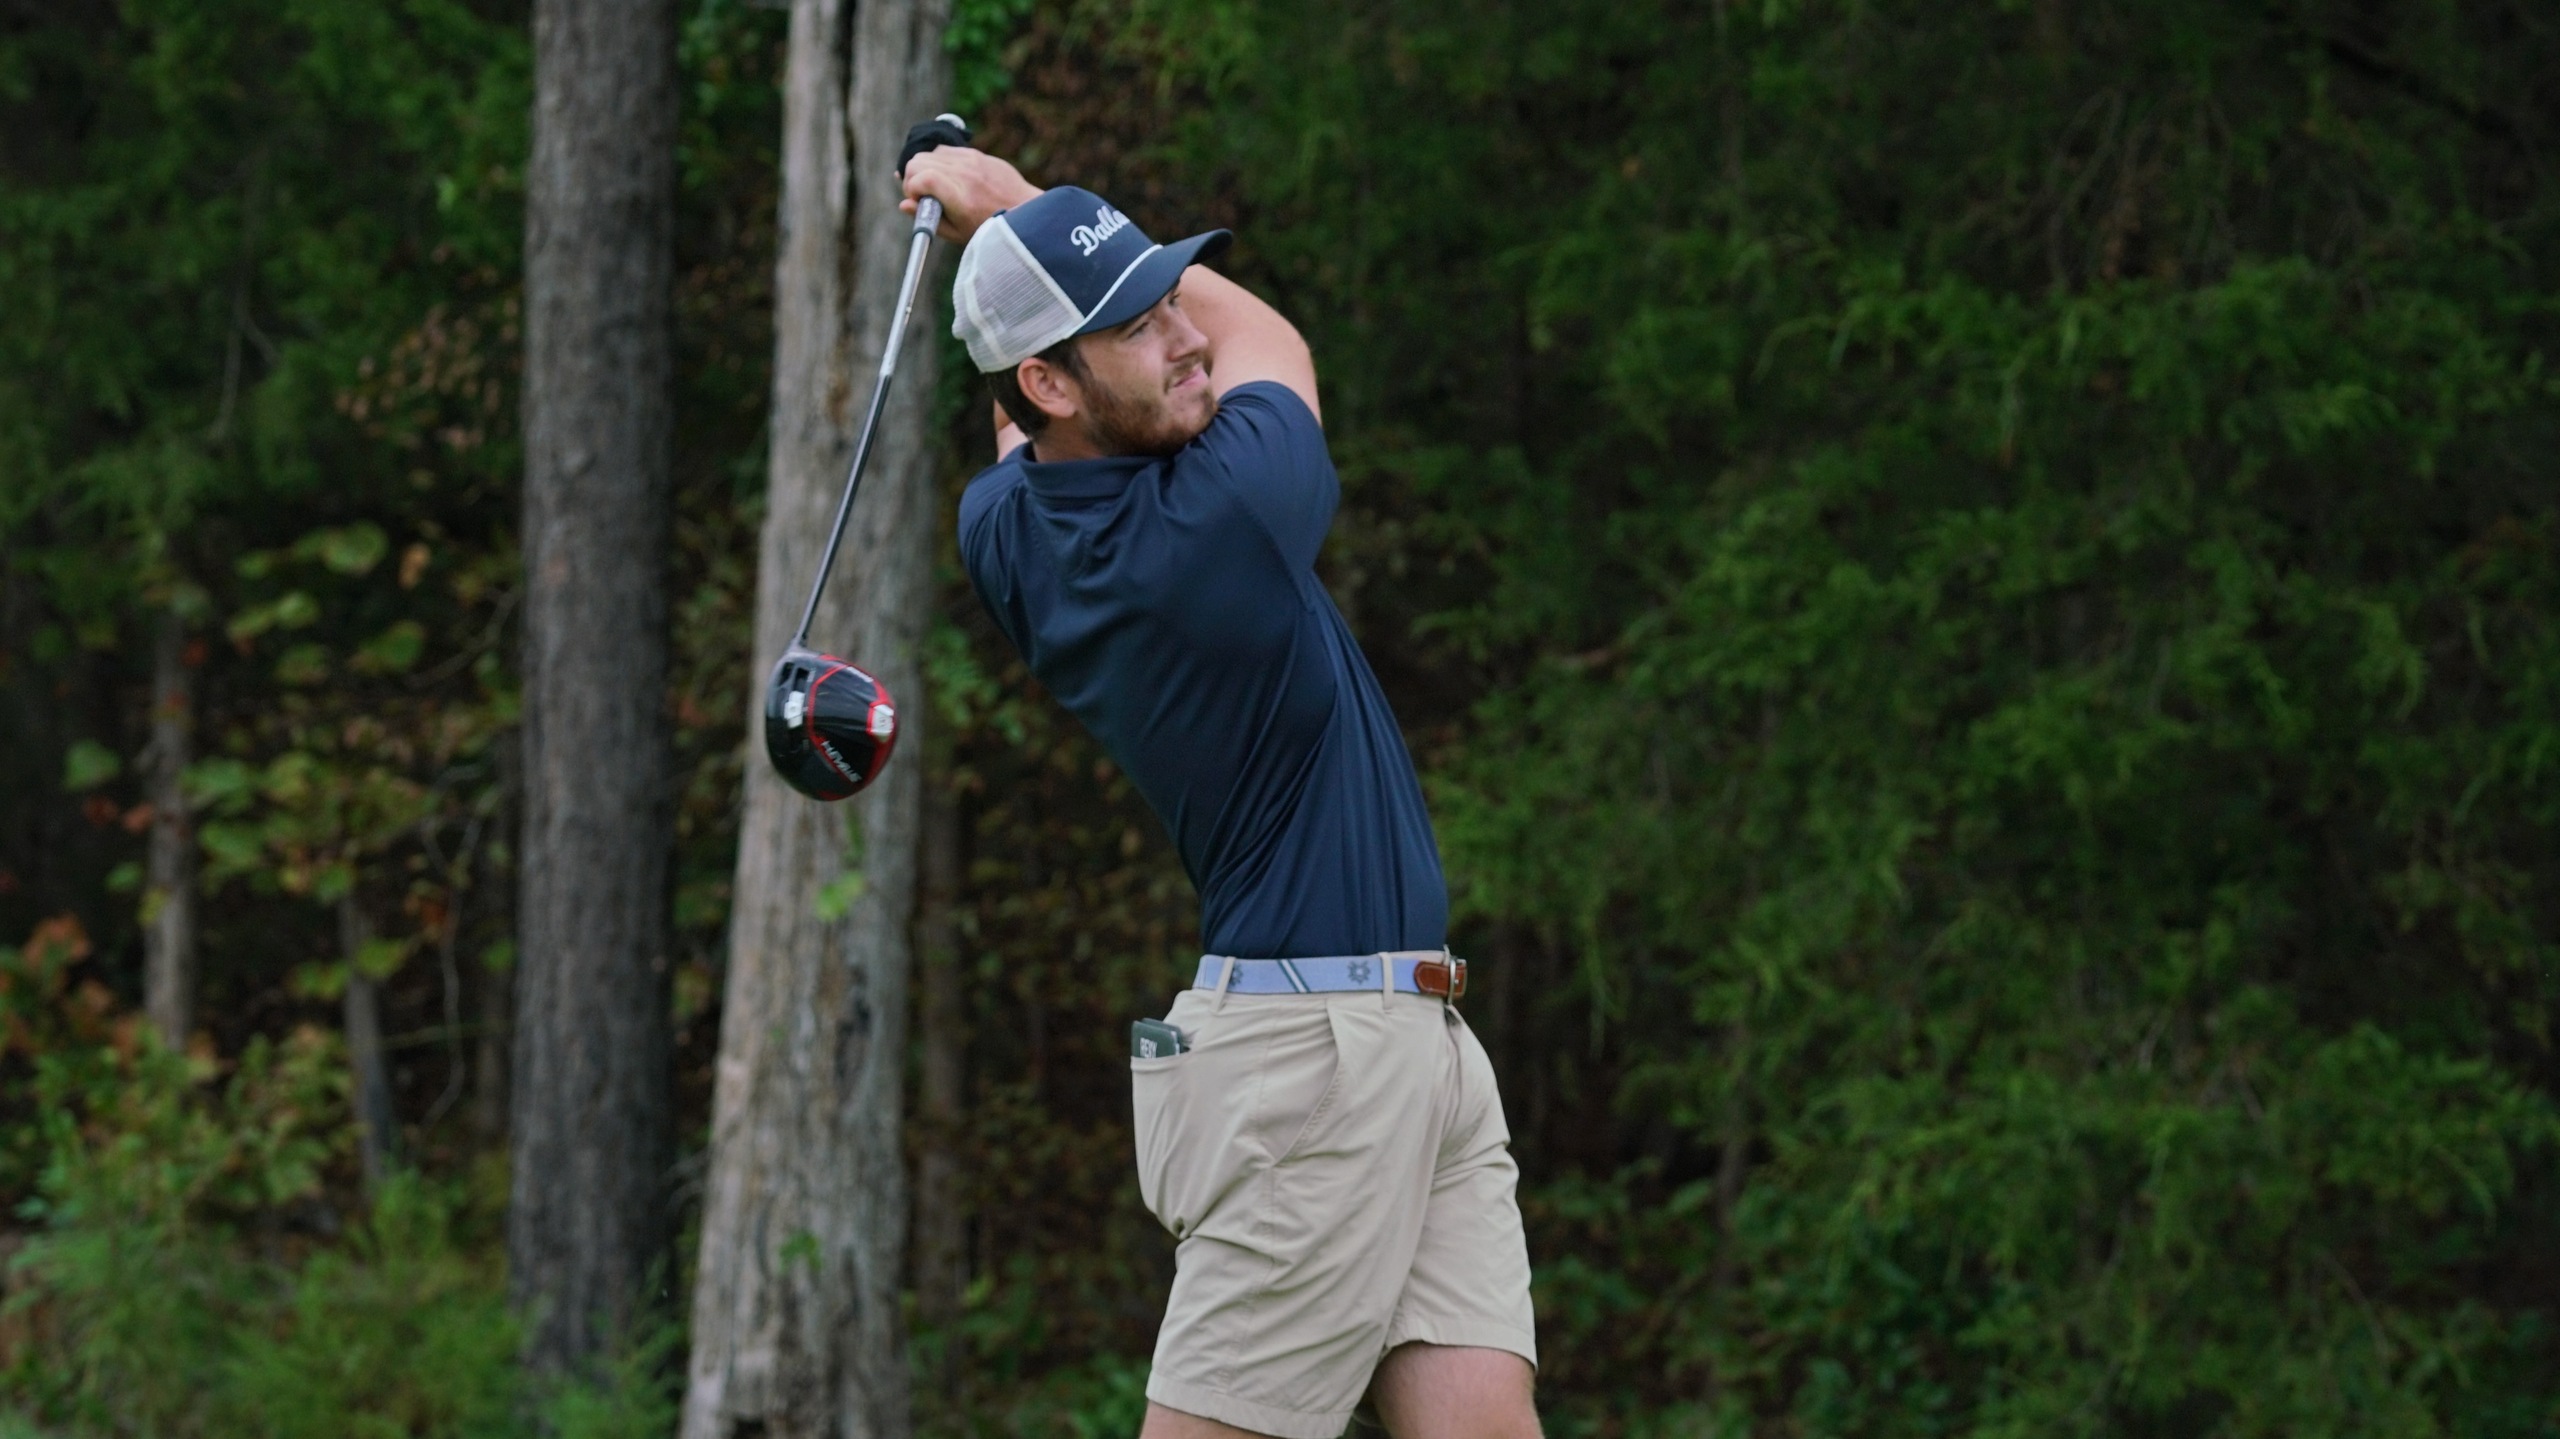 Men's Golf in 12th at Wynlakes Invitational